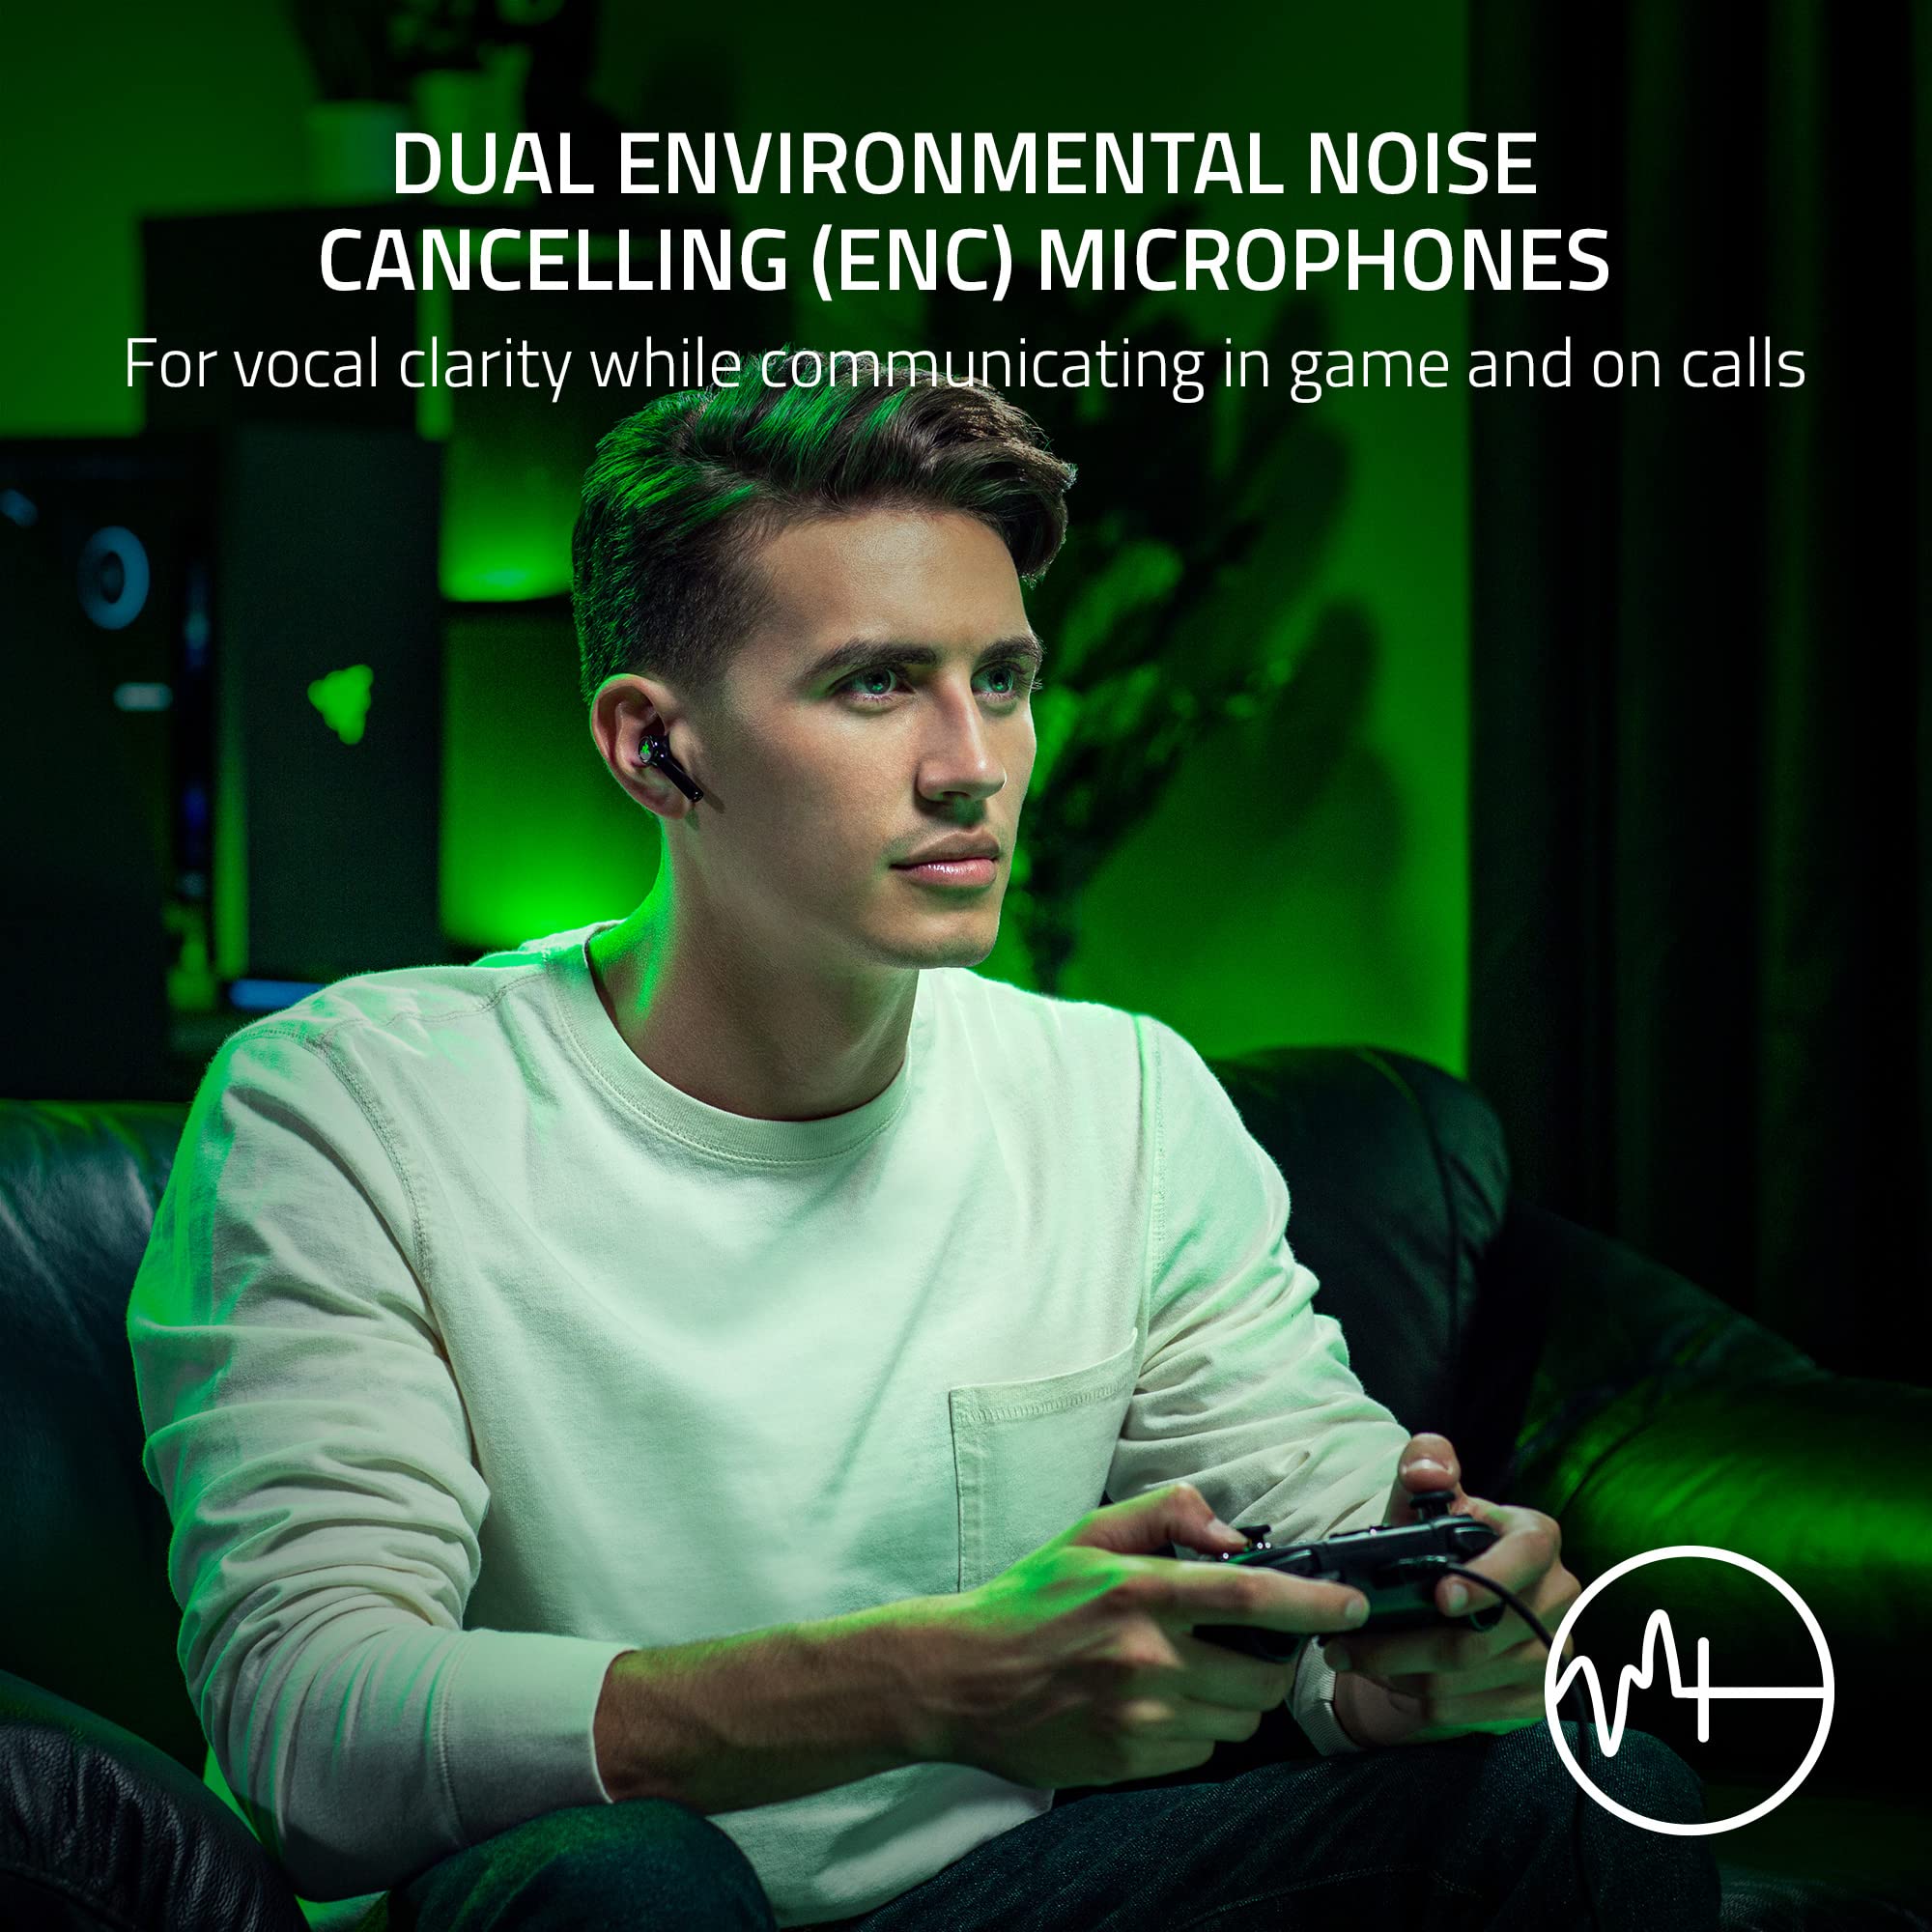 Razer Hammerhead HyperSpeed Wireless Multi-Platform Gaming Earbuds for Xbox Series X|S, Xbox One, PC, Mobile: ANC - Noise Cancelling Mic - Bluetooth 5.2 - RGB Chroma - 30 Hr Battery